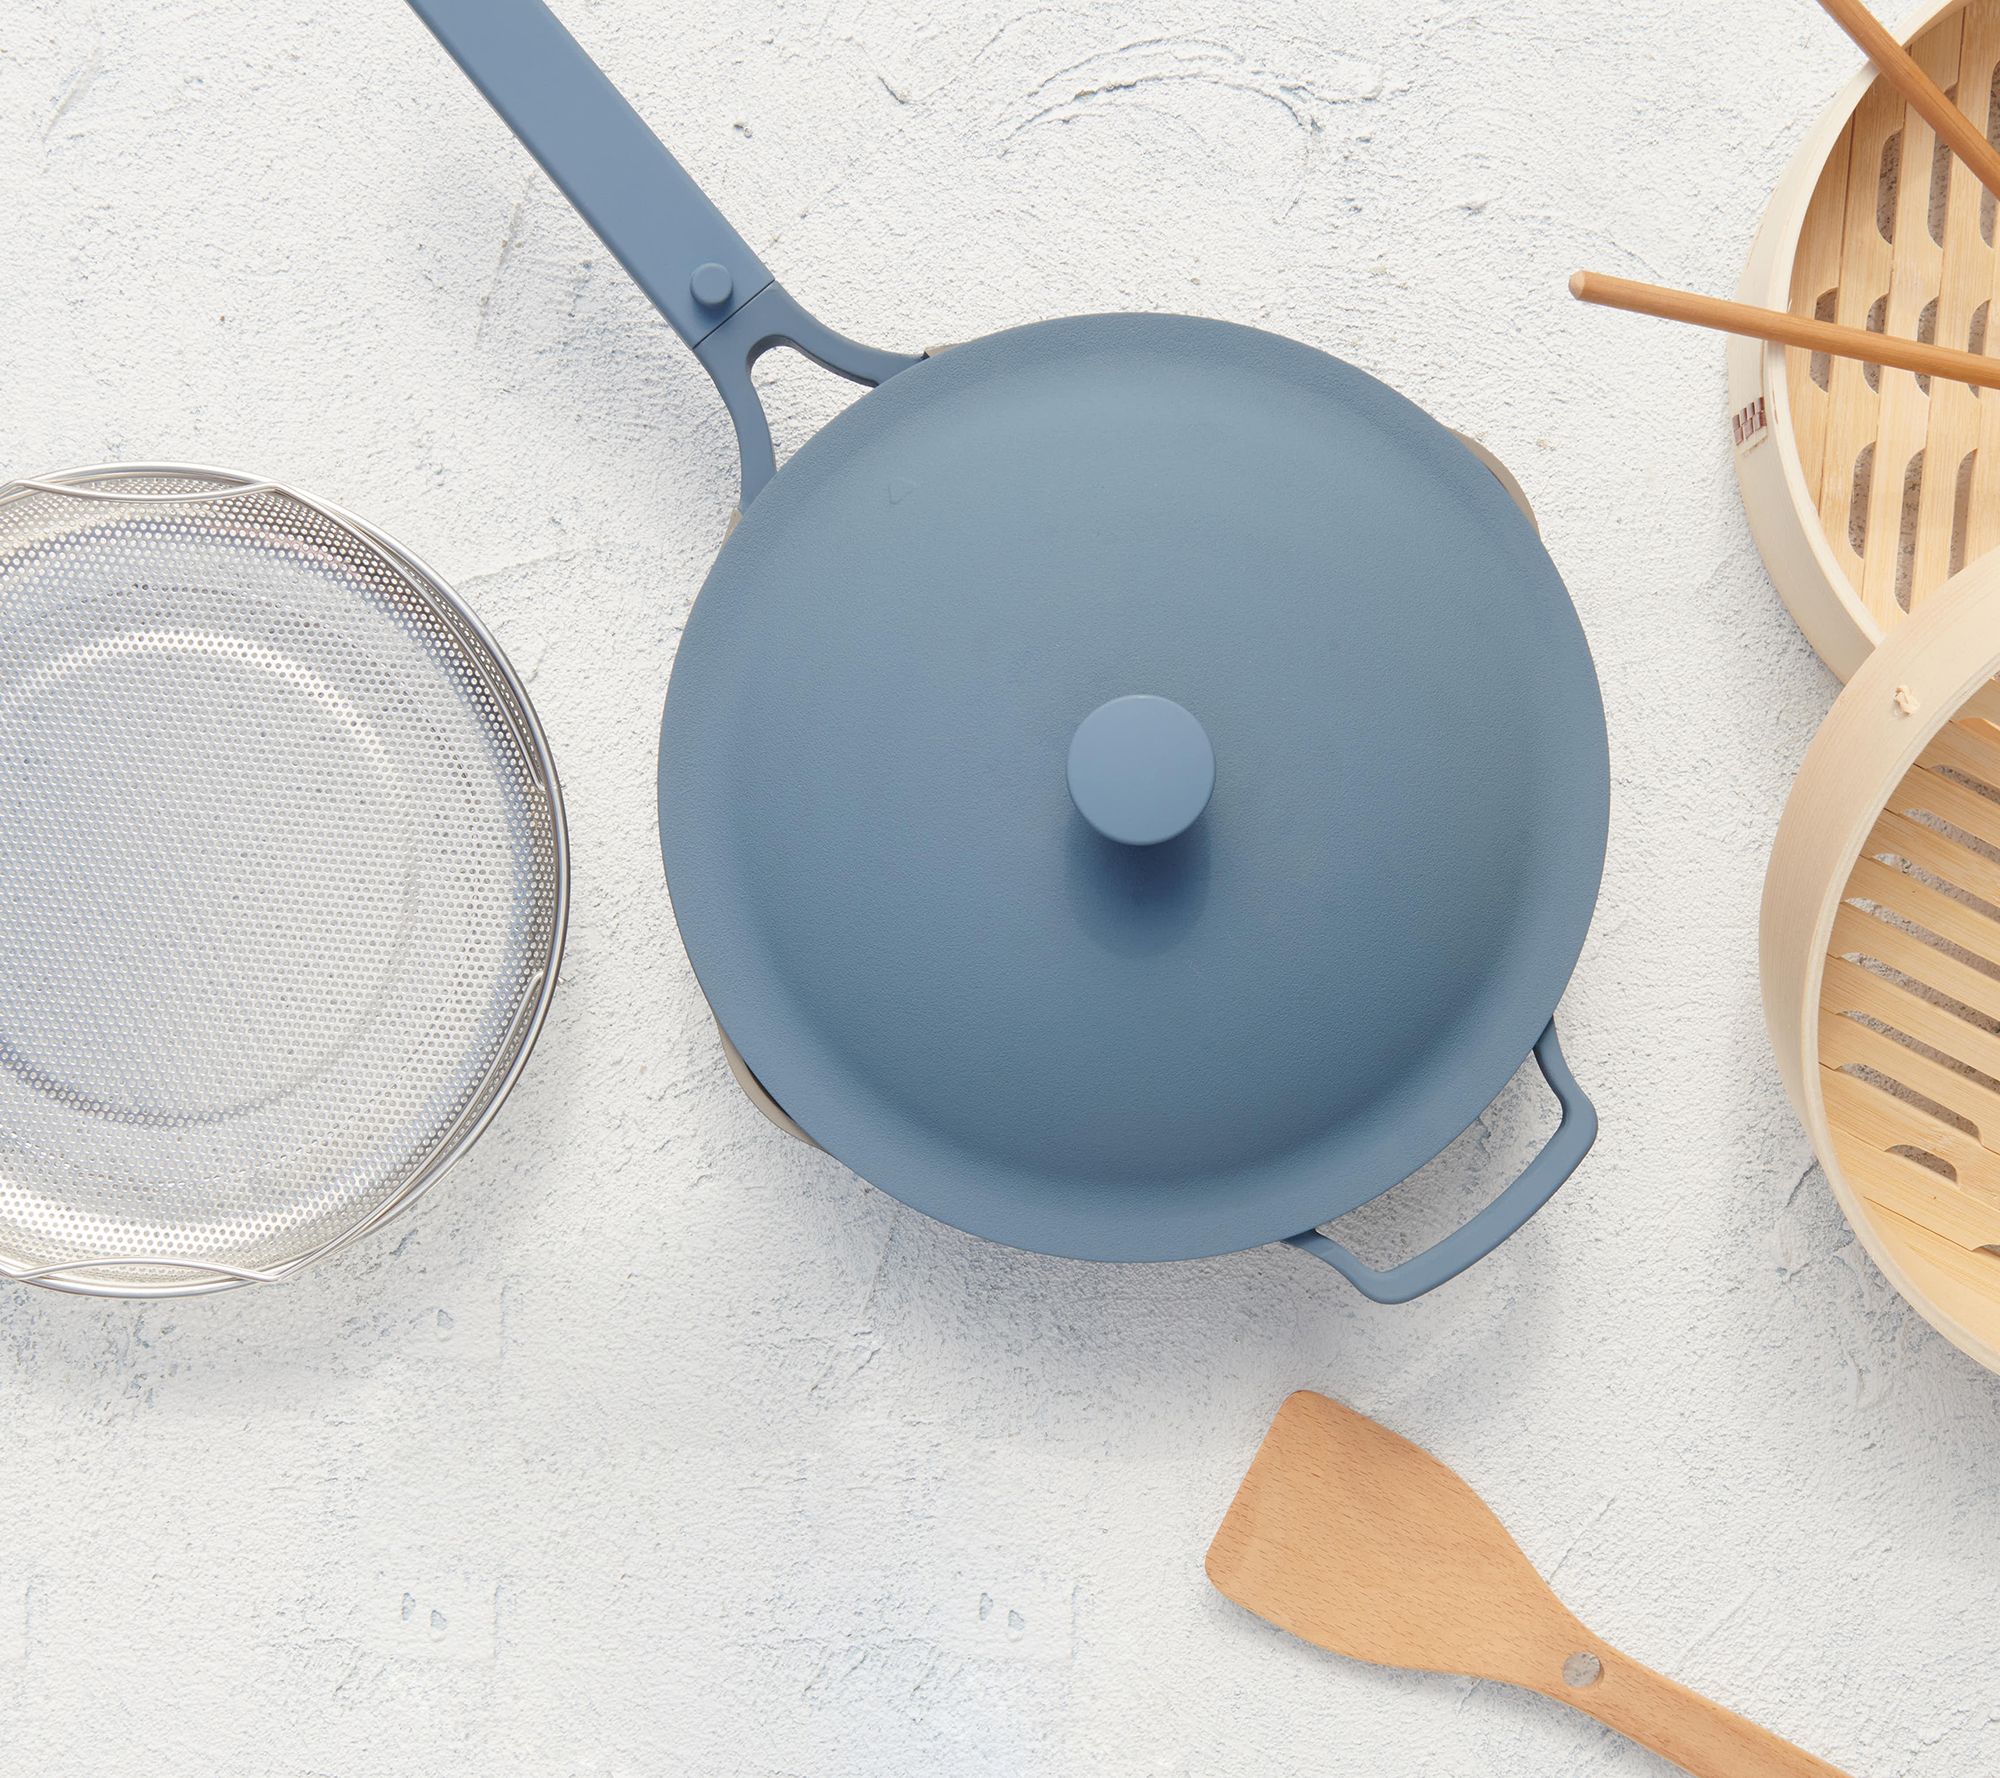 Our Place 10-in-1 Ceramic Nonstick Always Pan 2.0 with Spruce